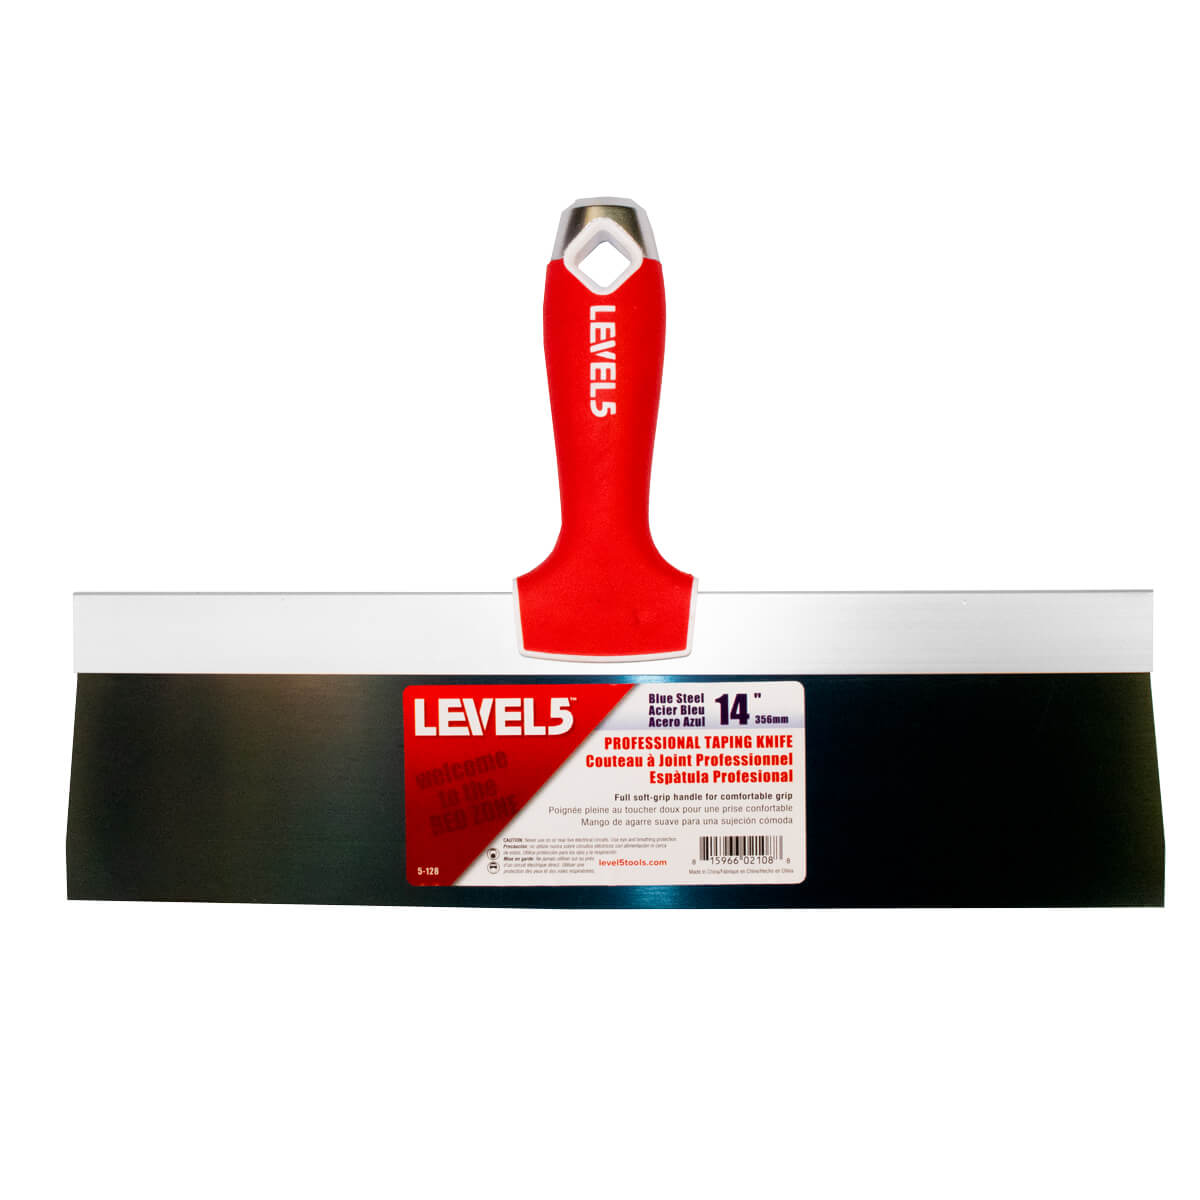 Taping Knife Blue Steel 14" 350mm Level5 Tools